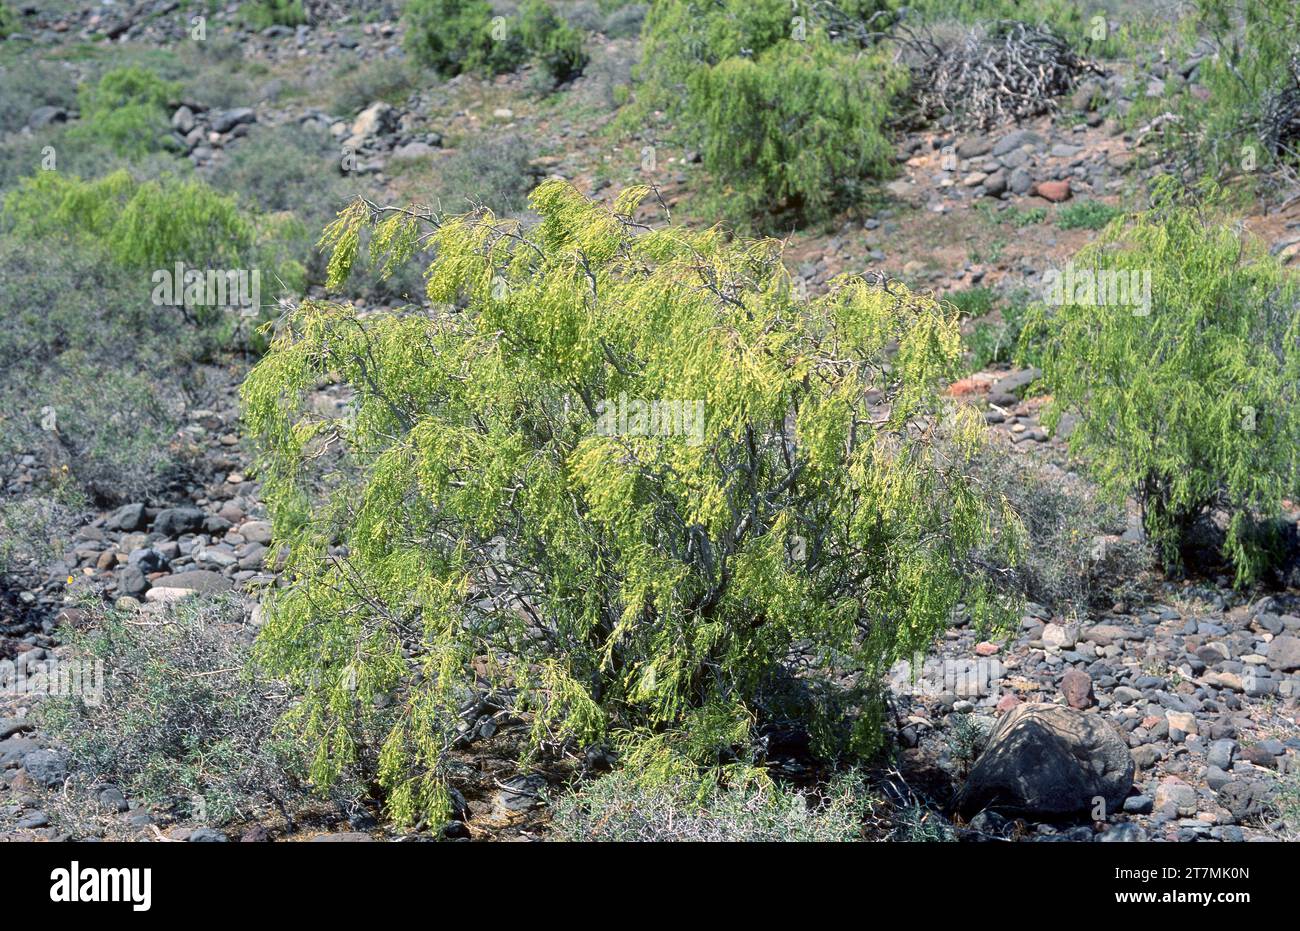 Balo (Plocama pendula) is a shrub endemic to all Canary Islands except Lanzarote. This photo was taken in Tenerife, Canary Islands, Spain. Stock Photo